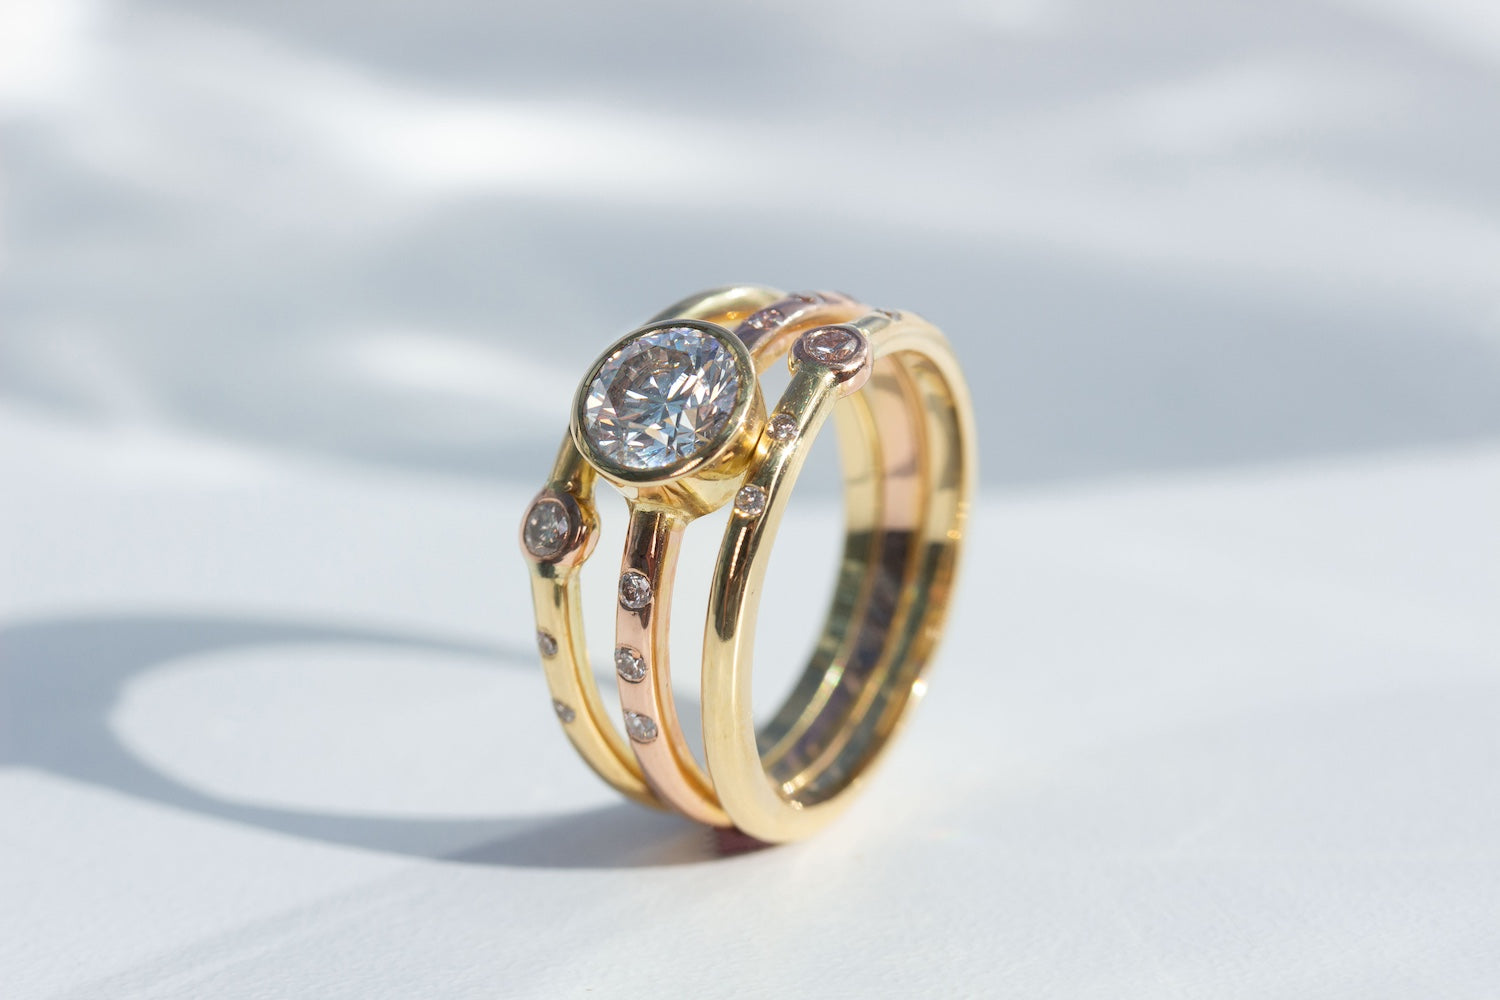 Triple Ring Design in 18K Yellow and Rose Gold and 1ct Diamond Ring Remodel on white background